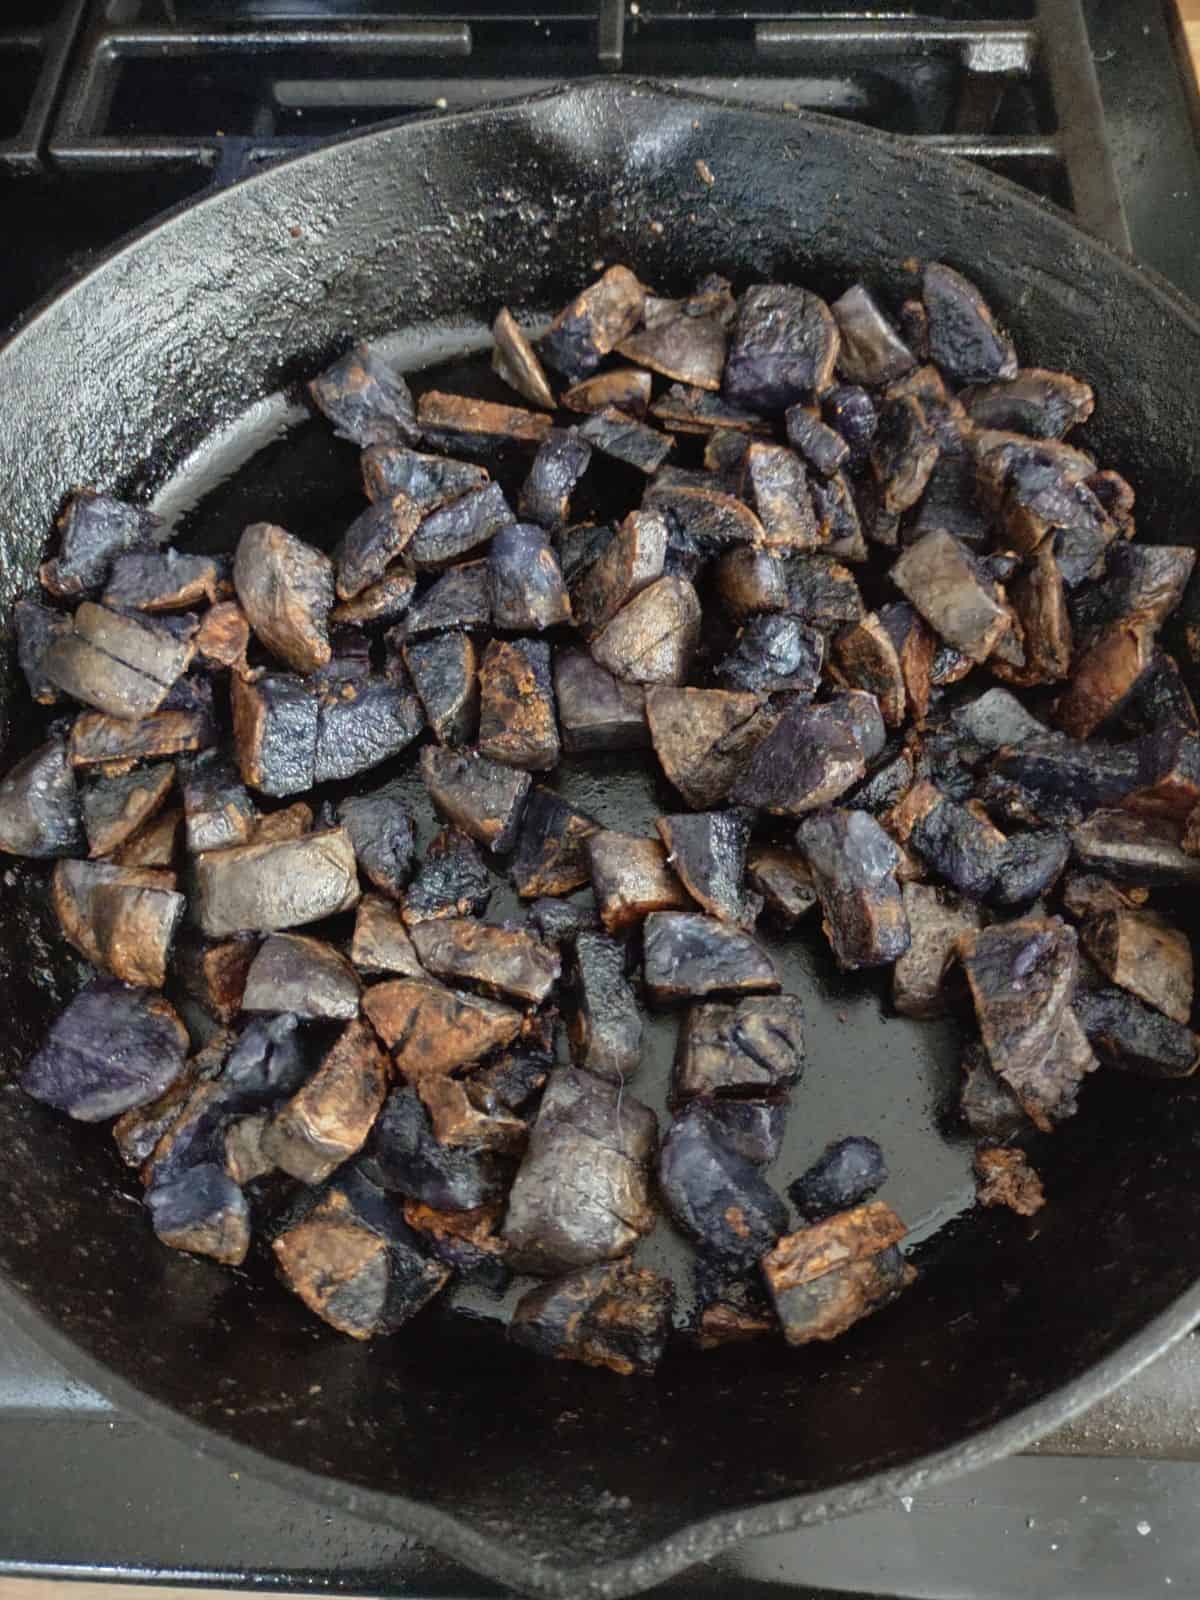 Cubed purple potatoes being browned in a cast iron skillet.